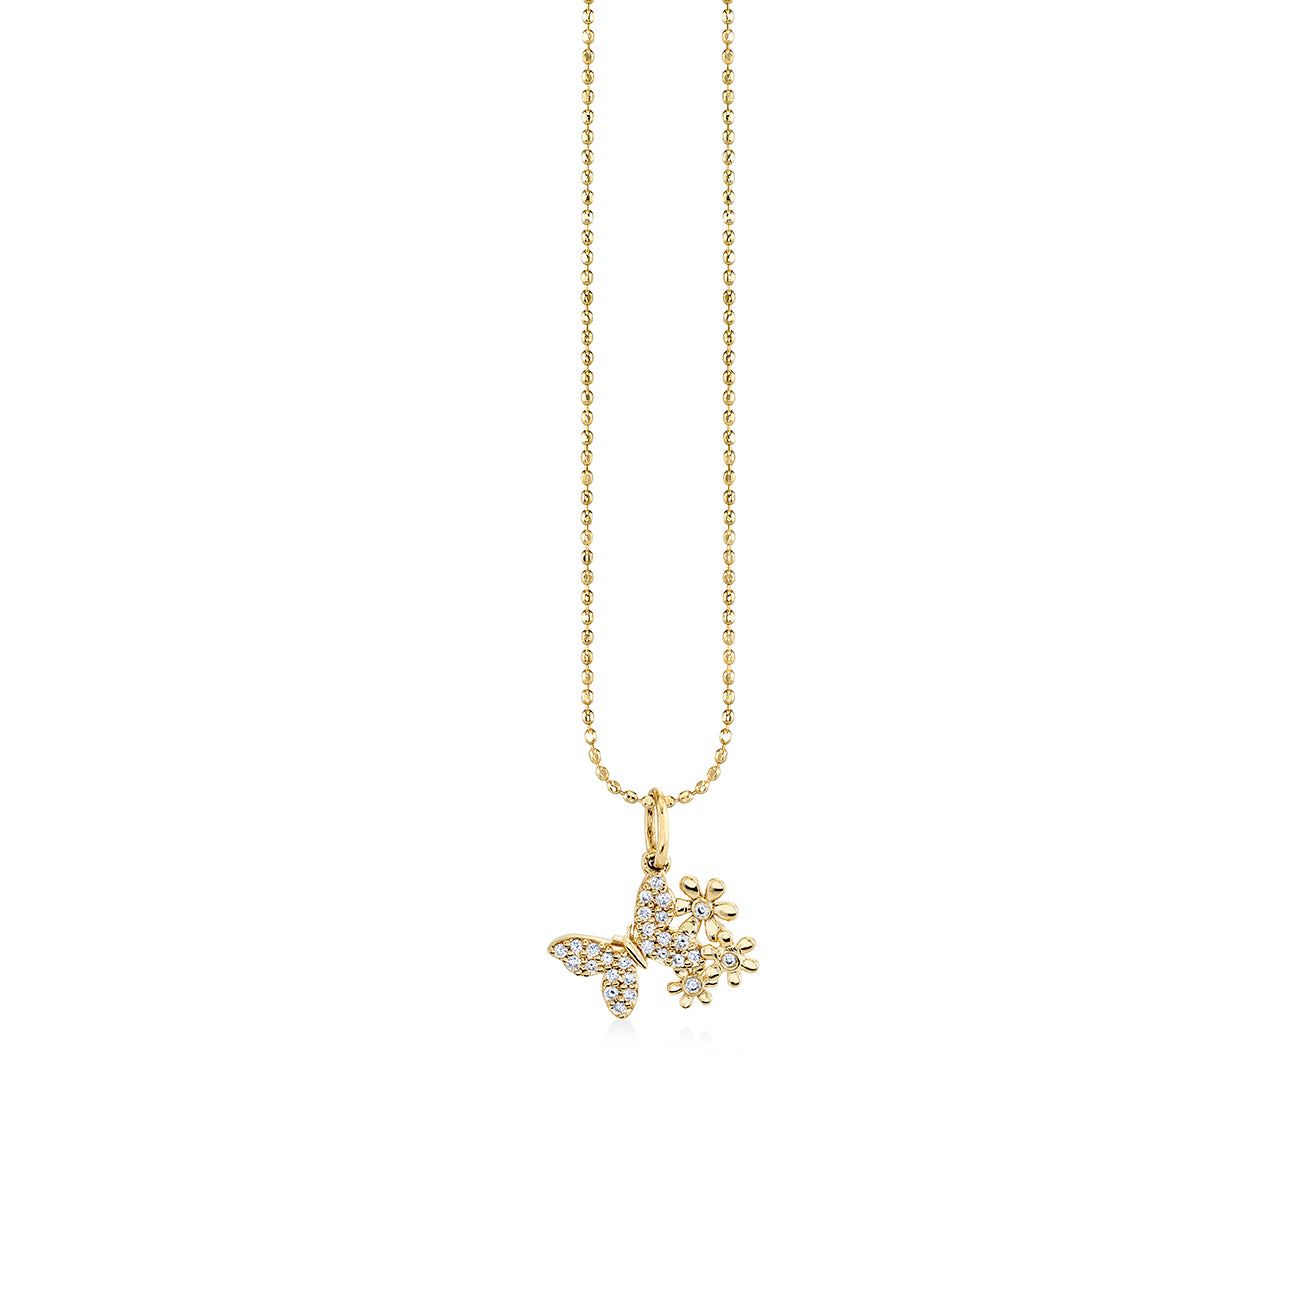 14k Gold Necklaces and Charms - Sydney Evan